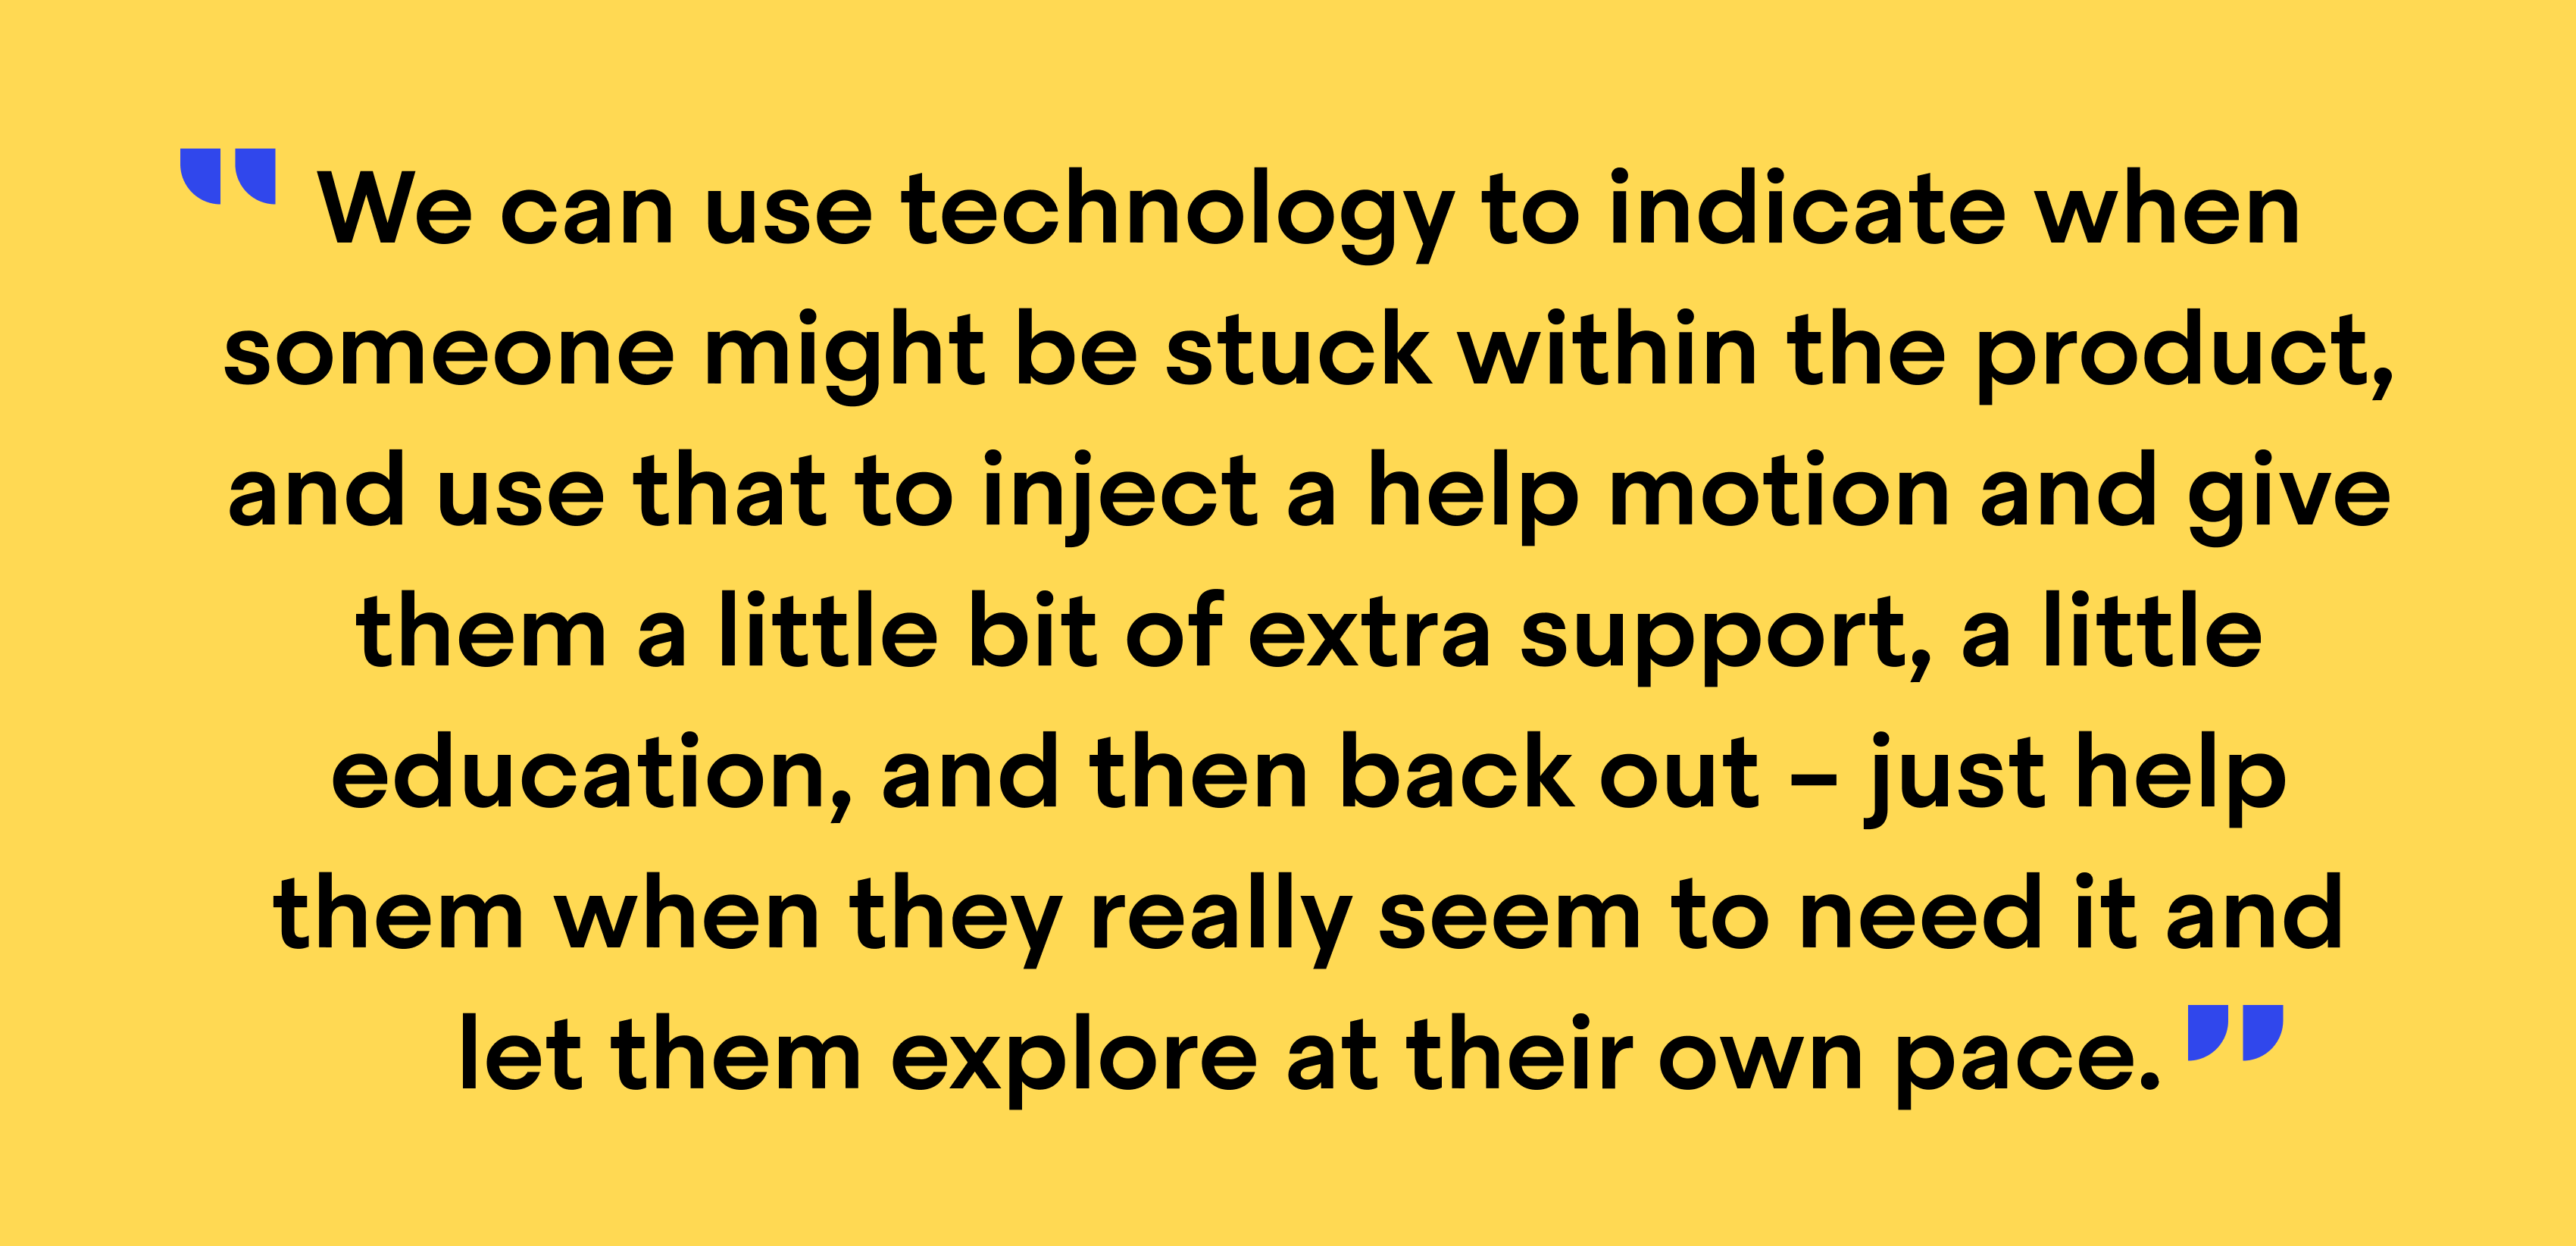 Quote from Richard Hall, Director of Support Operations at Zapier: "We can use technology to indicate when someone might be stuck within the product, and use that to inject a help motion and give them a little bit of extra support, a little education, and then back out – just help them when they really seem to need it and let them explore at their own pace”